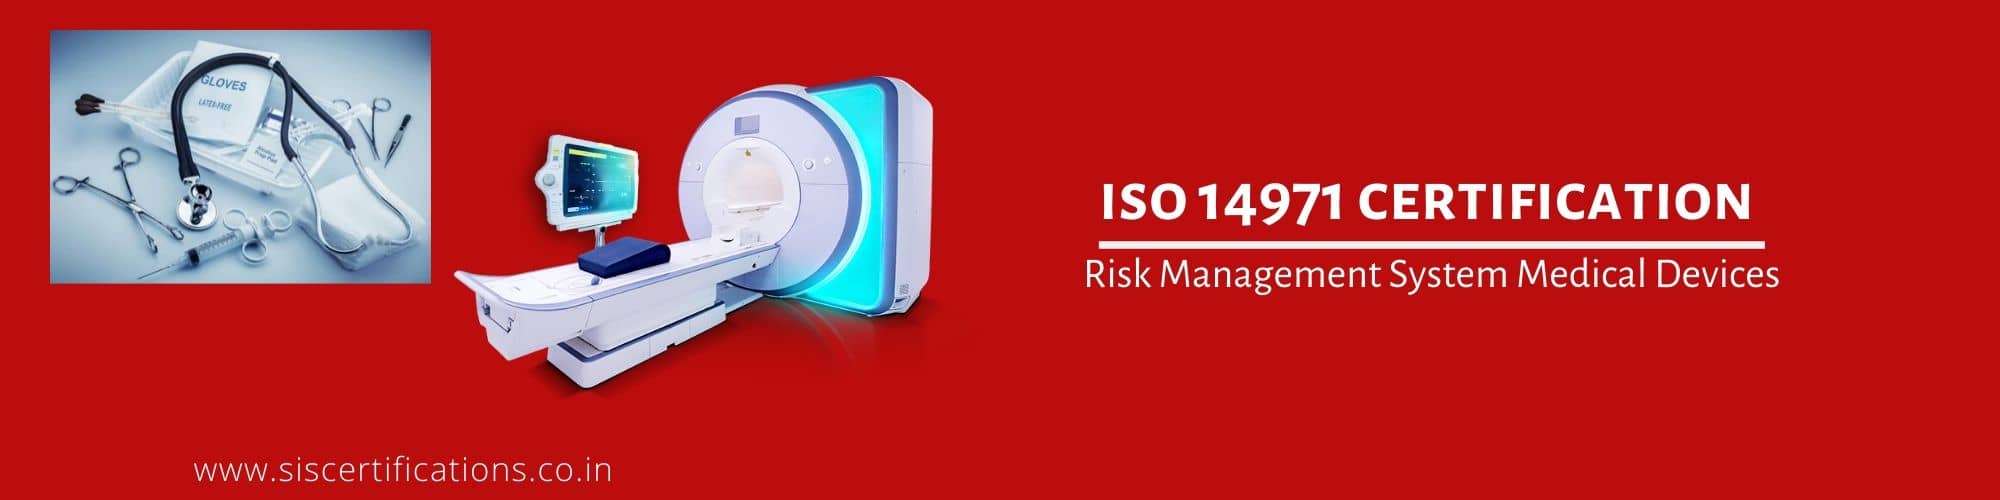 ISO 14971 Certification